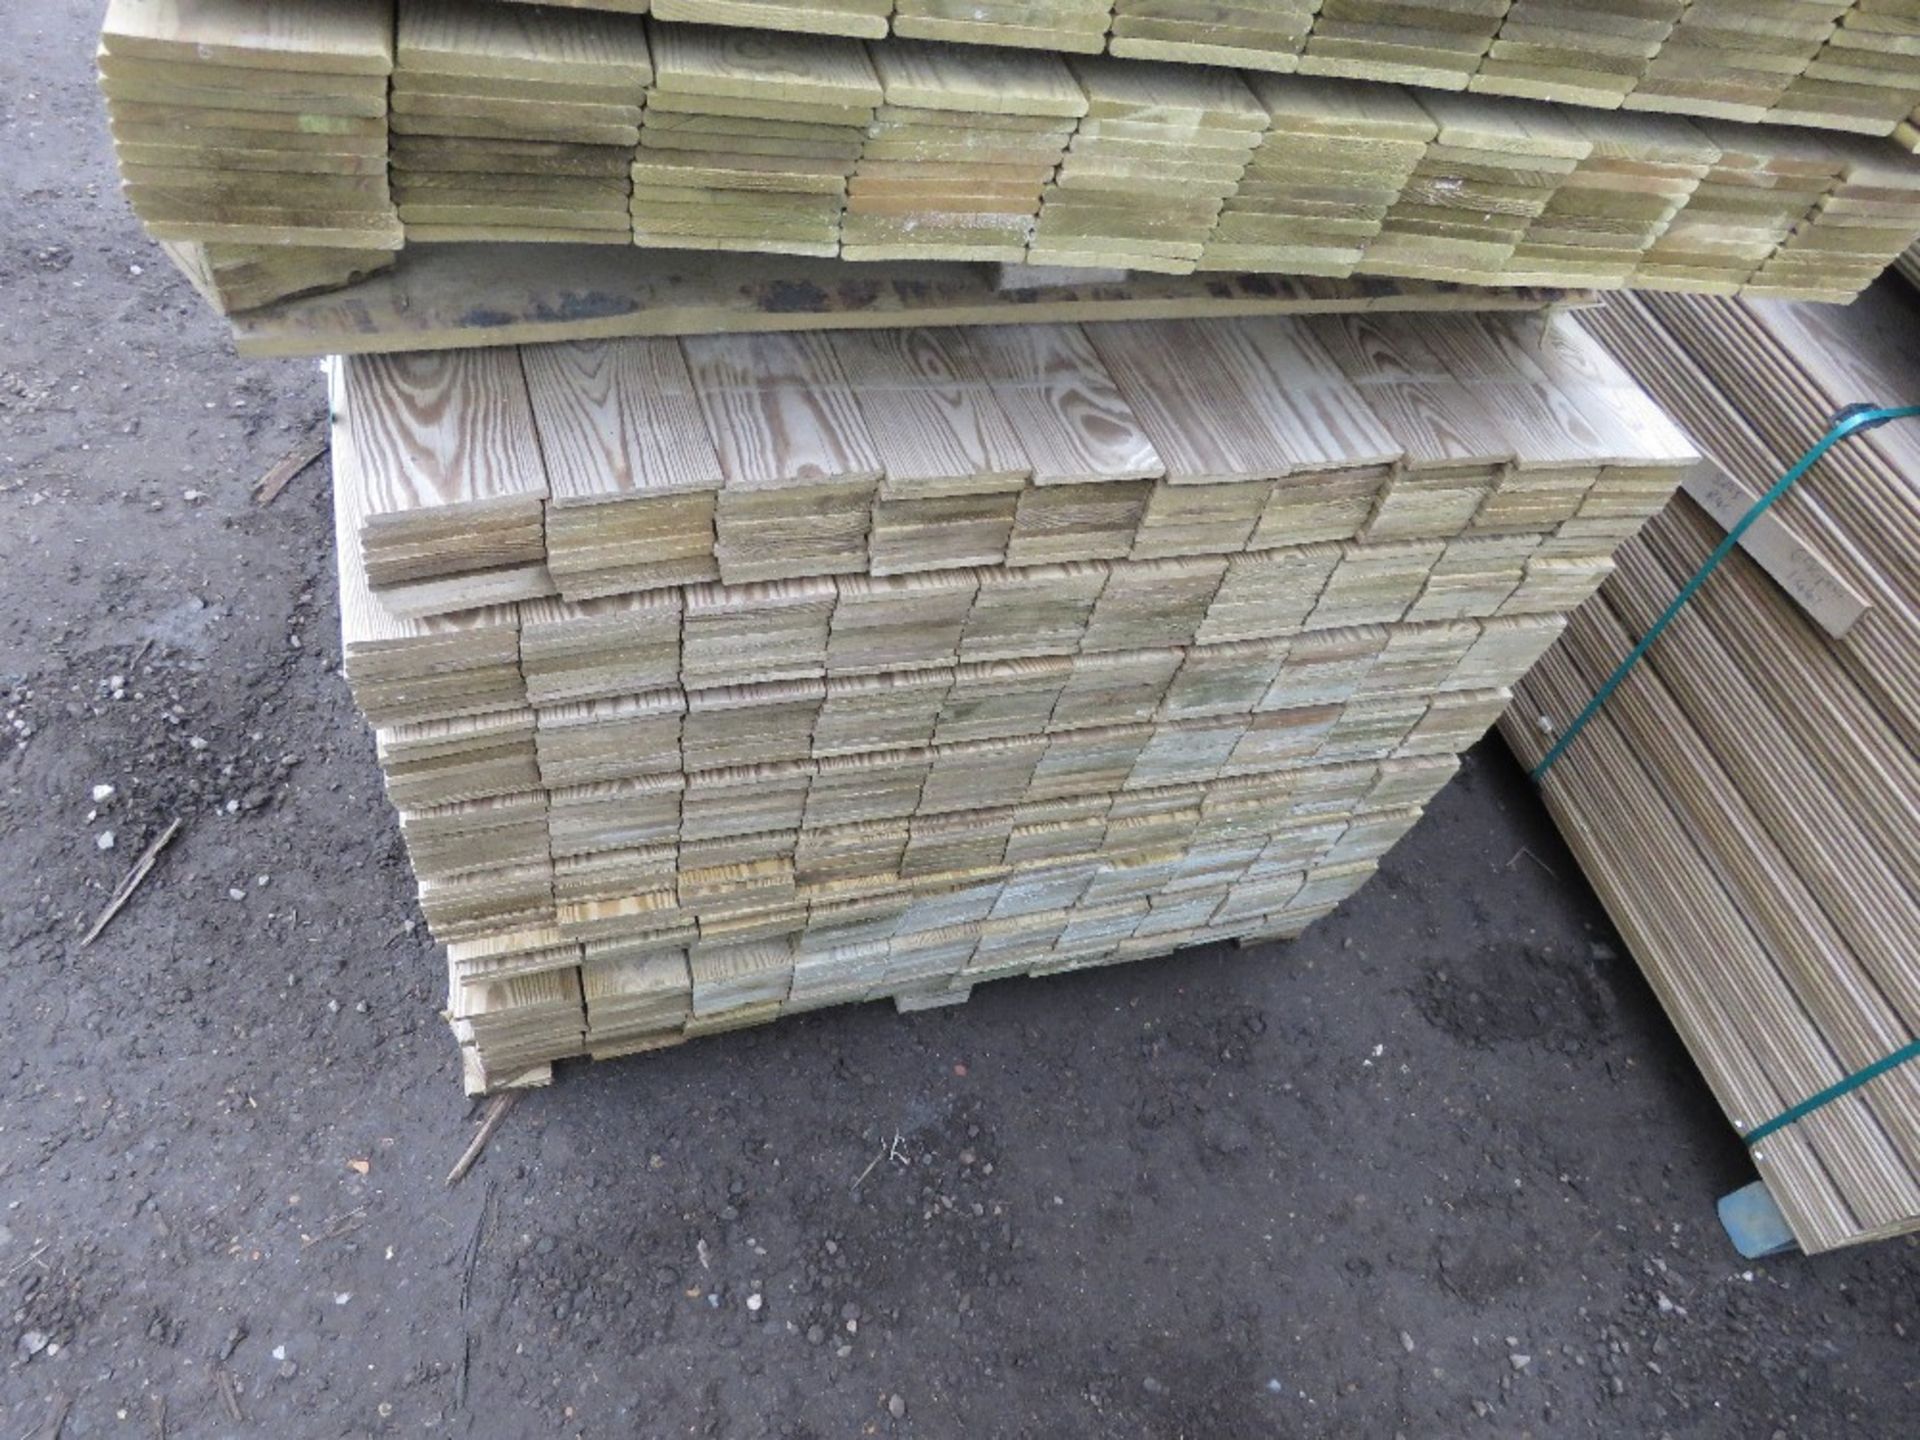 2 X PACKS OF PRESSURE TREATED HIT AND MISS FENCE CLADDING TIMBER BOARDS: 1.14M LENGTH X 100MM WIDTH - Image 3 of 4